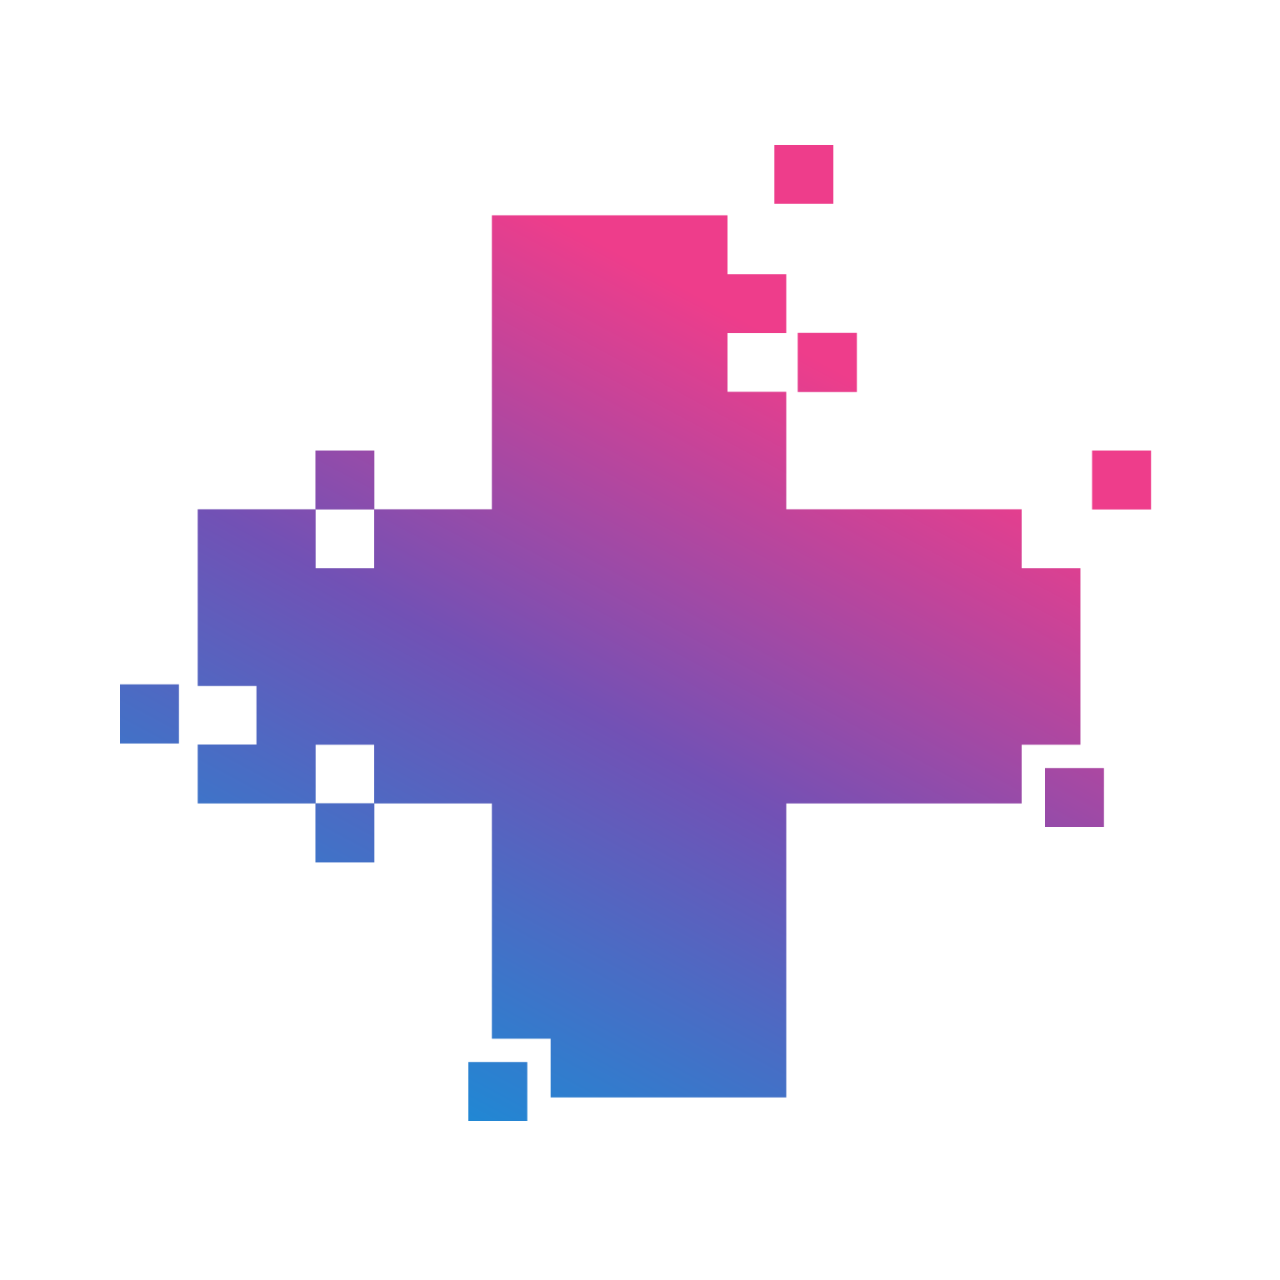 Emergency cross sign in pink and blue gradient